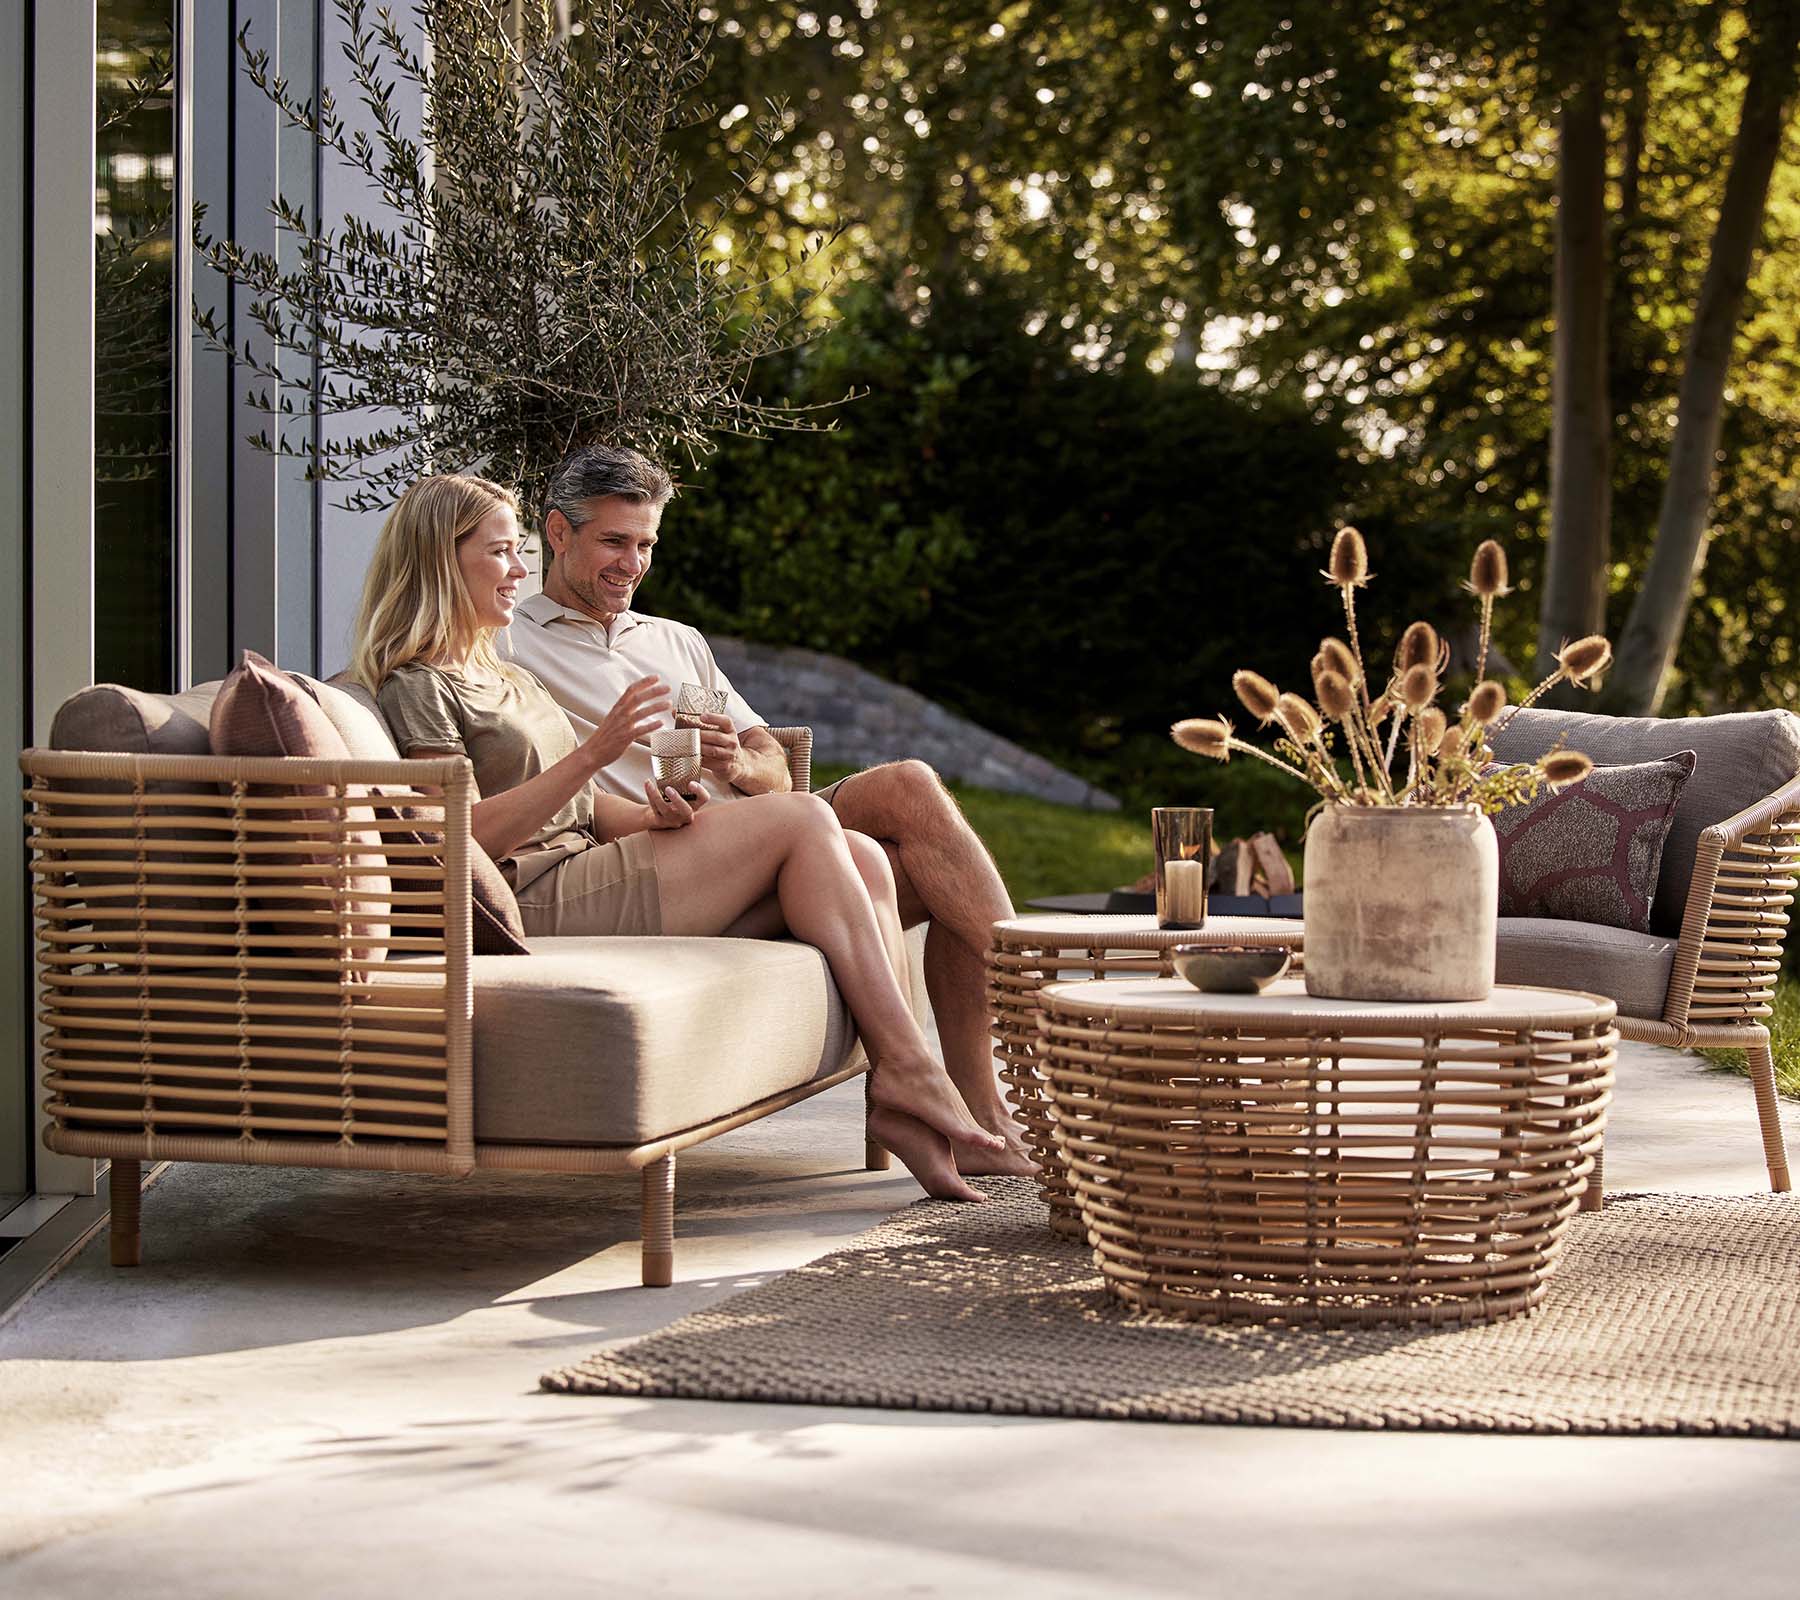 Cane-Line Denmark Cane-line Weave - Natural -incl. taupe Cane-line AirTouch Sense lounge chair OUTDOOR, incl. taupe Cane-line AirTouch cushions (7443)